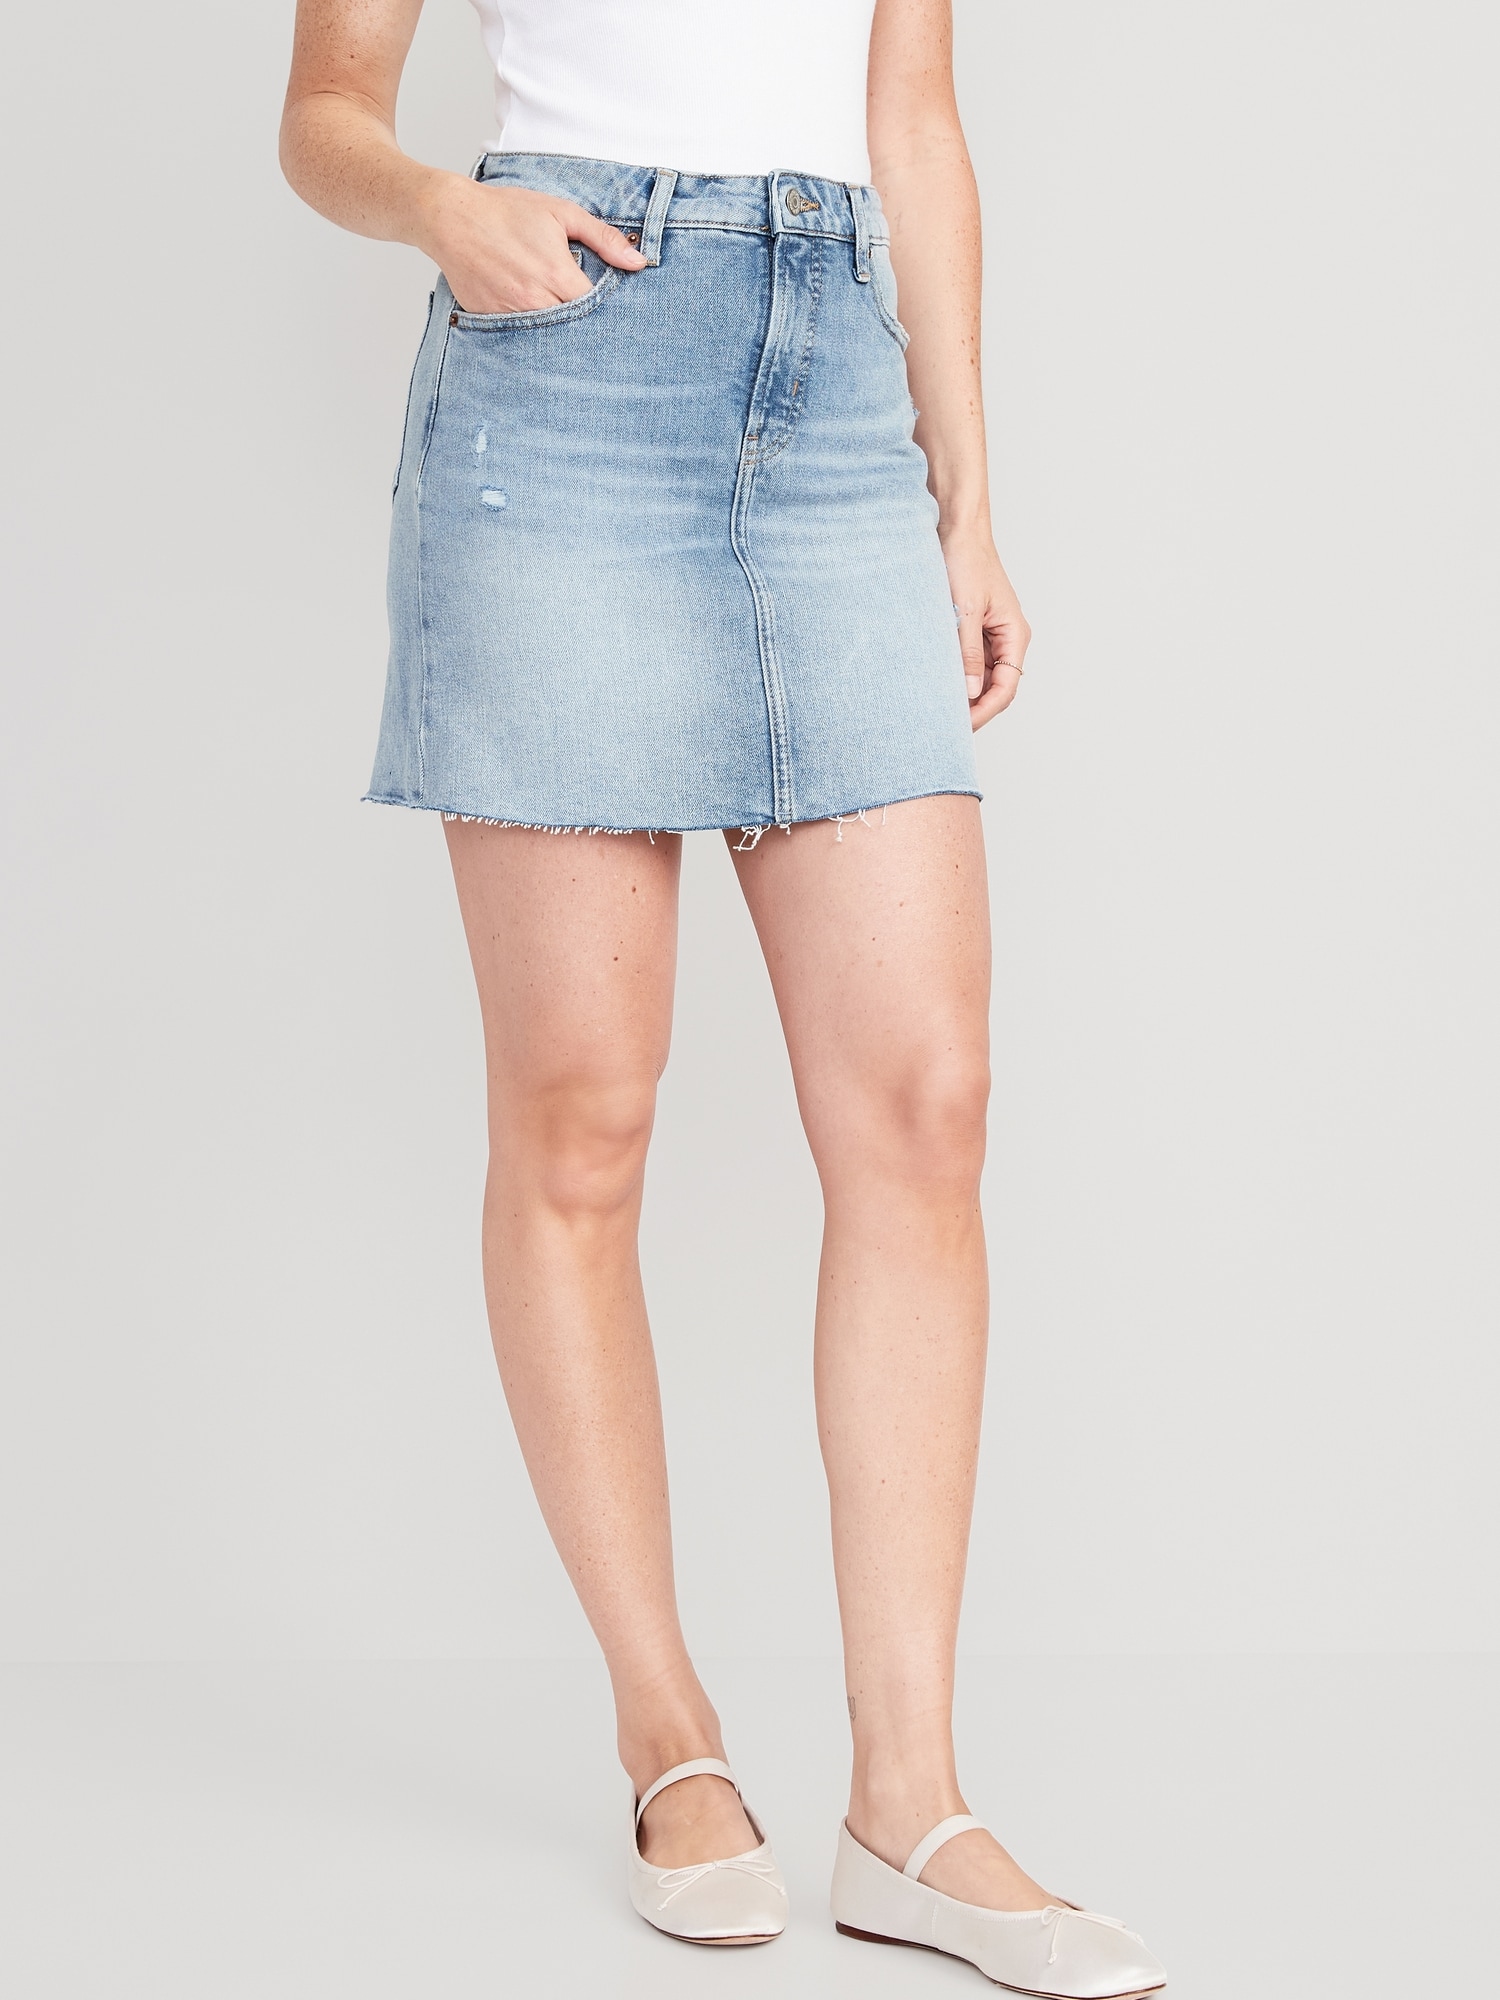 Denim Skirt Outfit Inspiration: Get Inspired by These 17 Adorable Look –  Forever Dolled Up